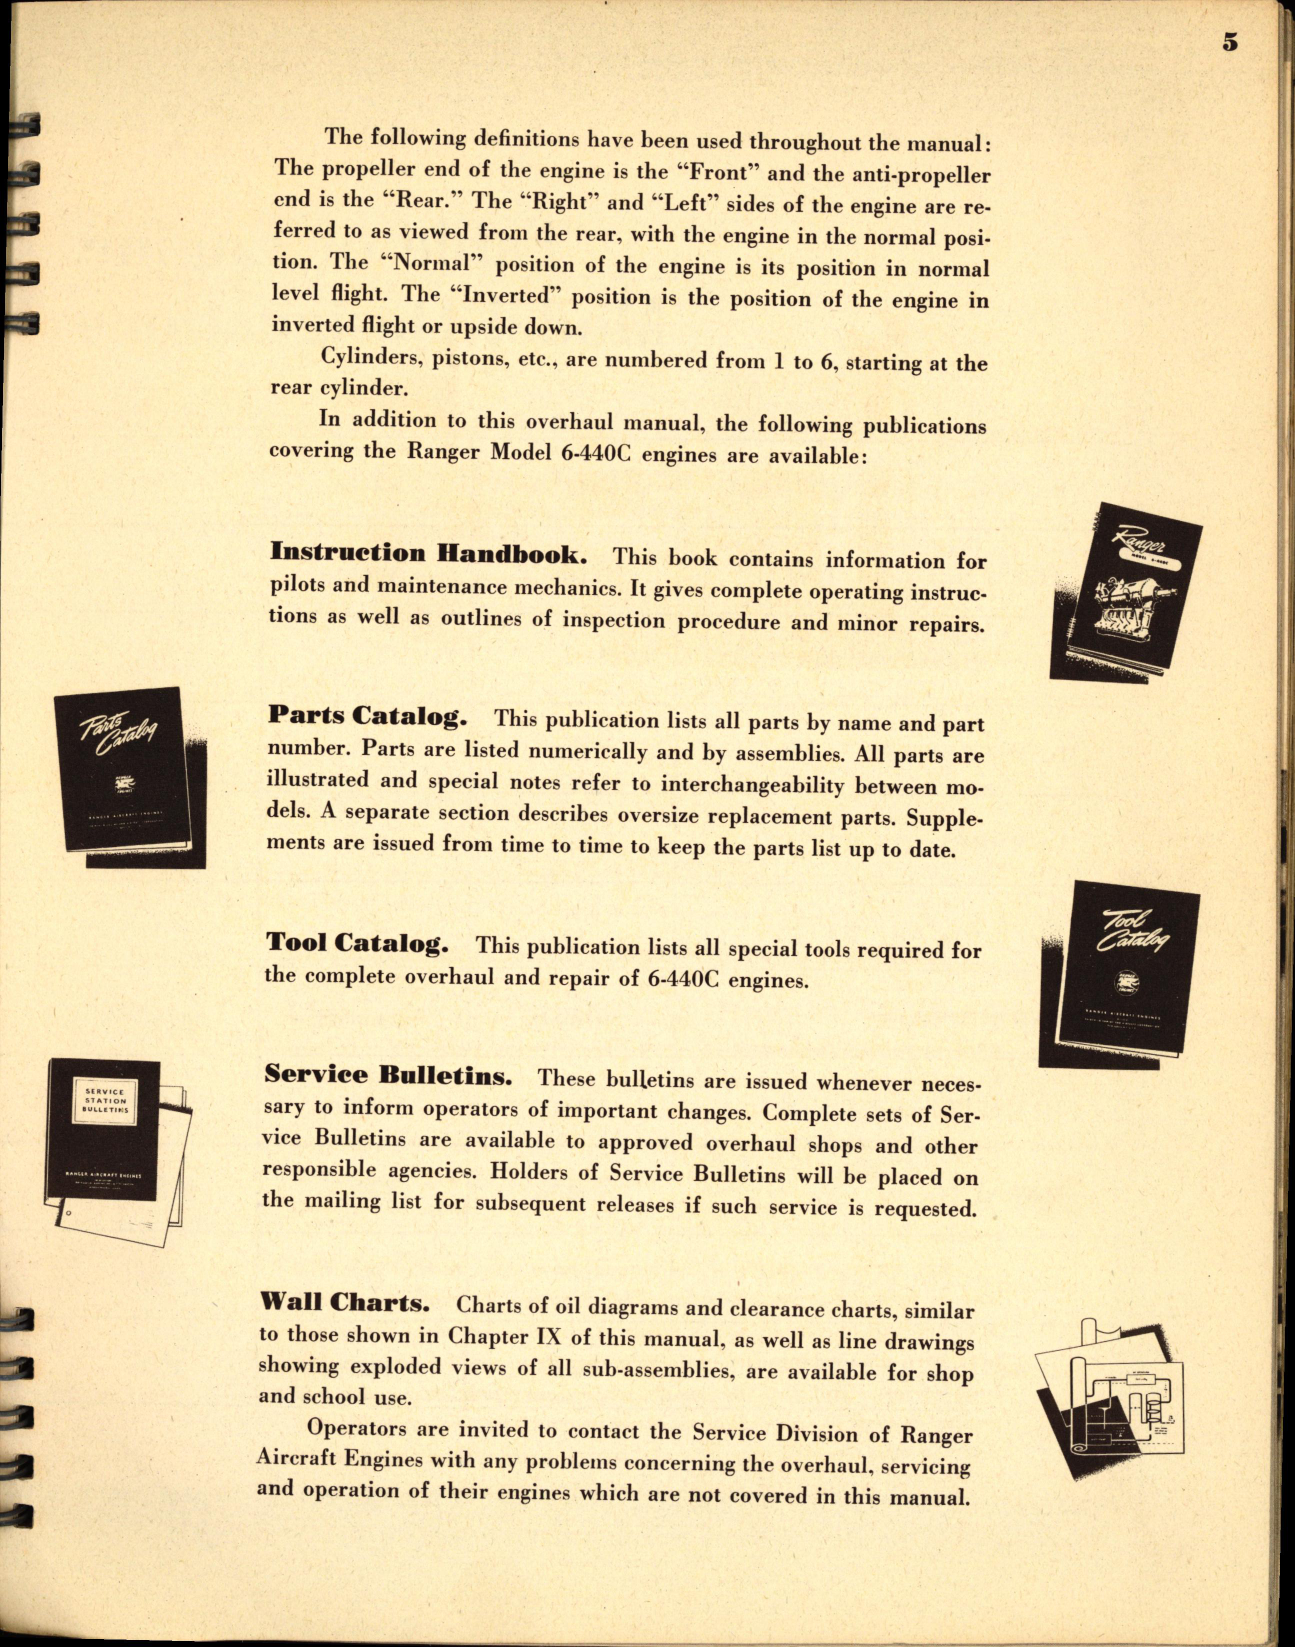 Sample page 7 from AirCorps Library document: Ranger Overhaul Manual for 6-440C